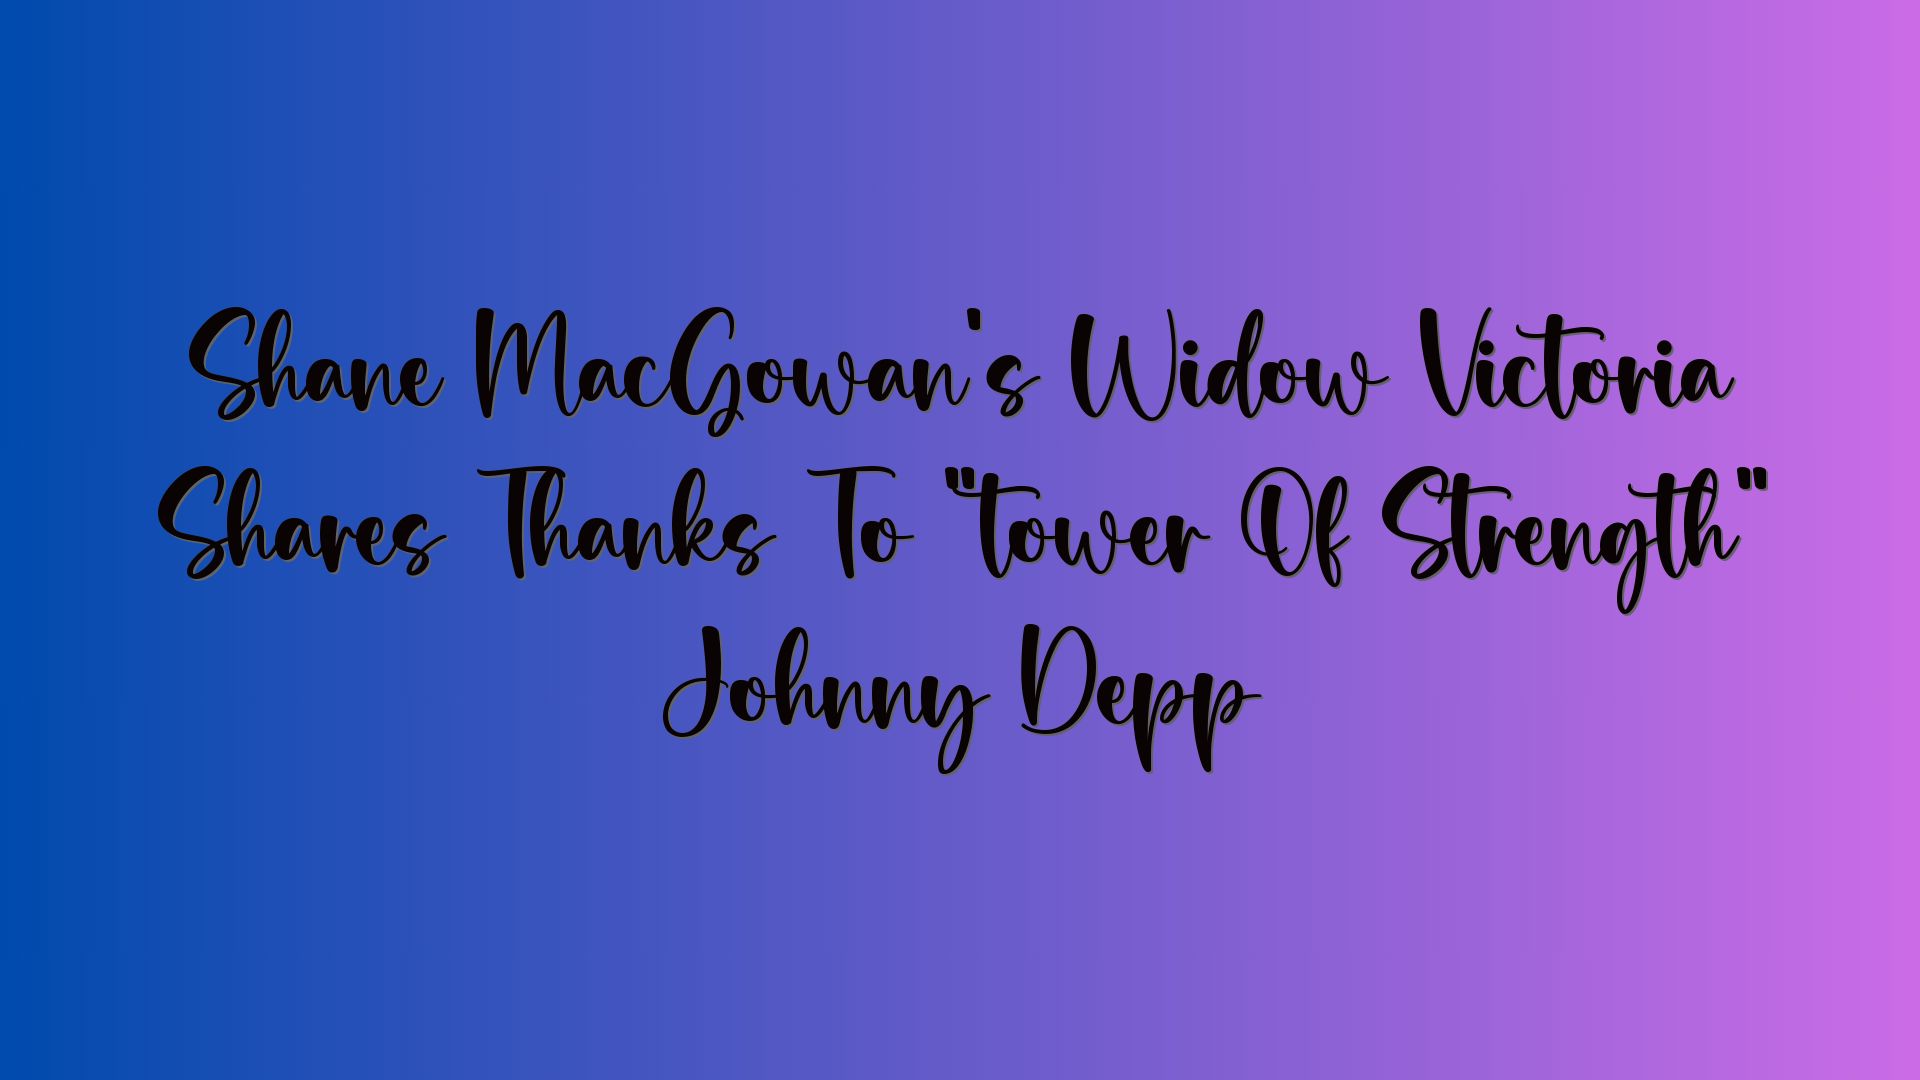 Shane MacGowan’s Widow Victoria Shares Thanks To “tower Of Strength” Johnny Depp